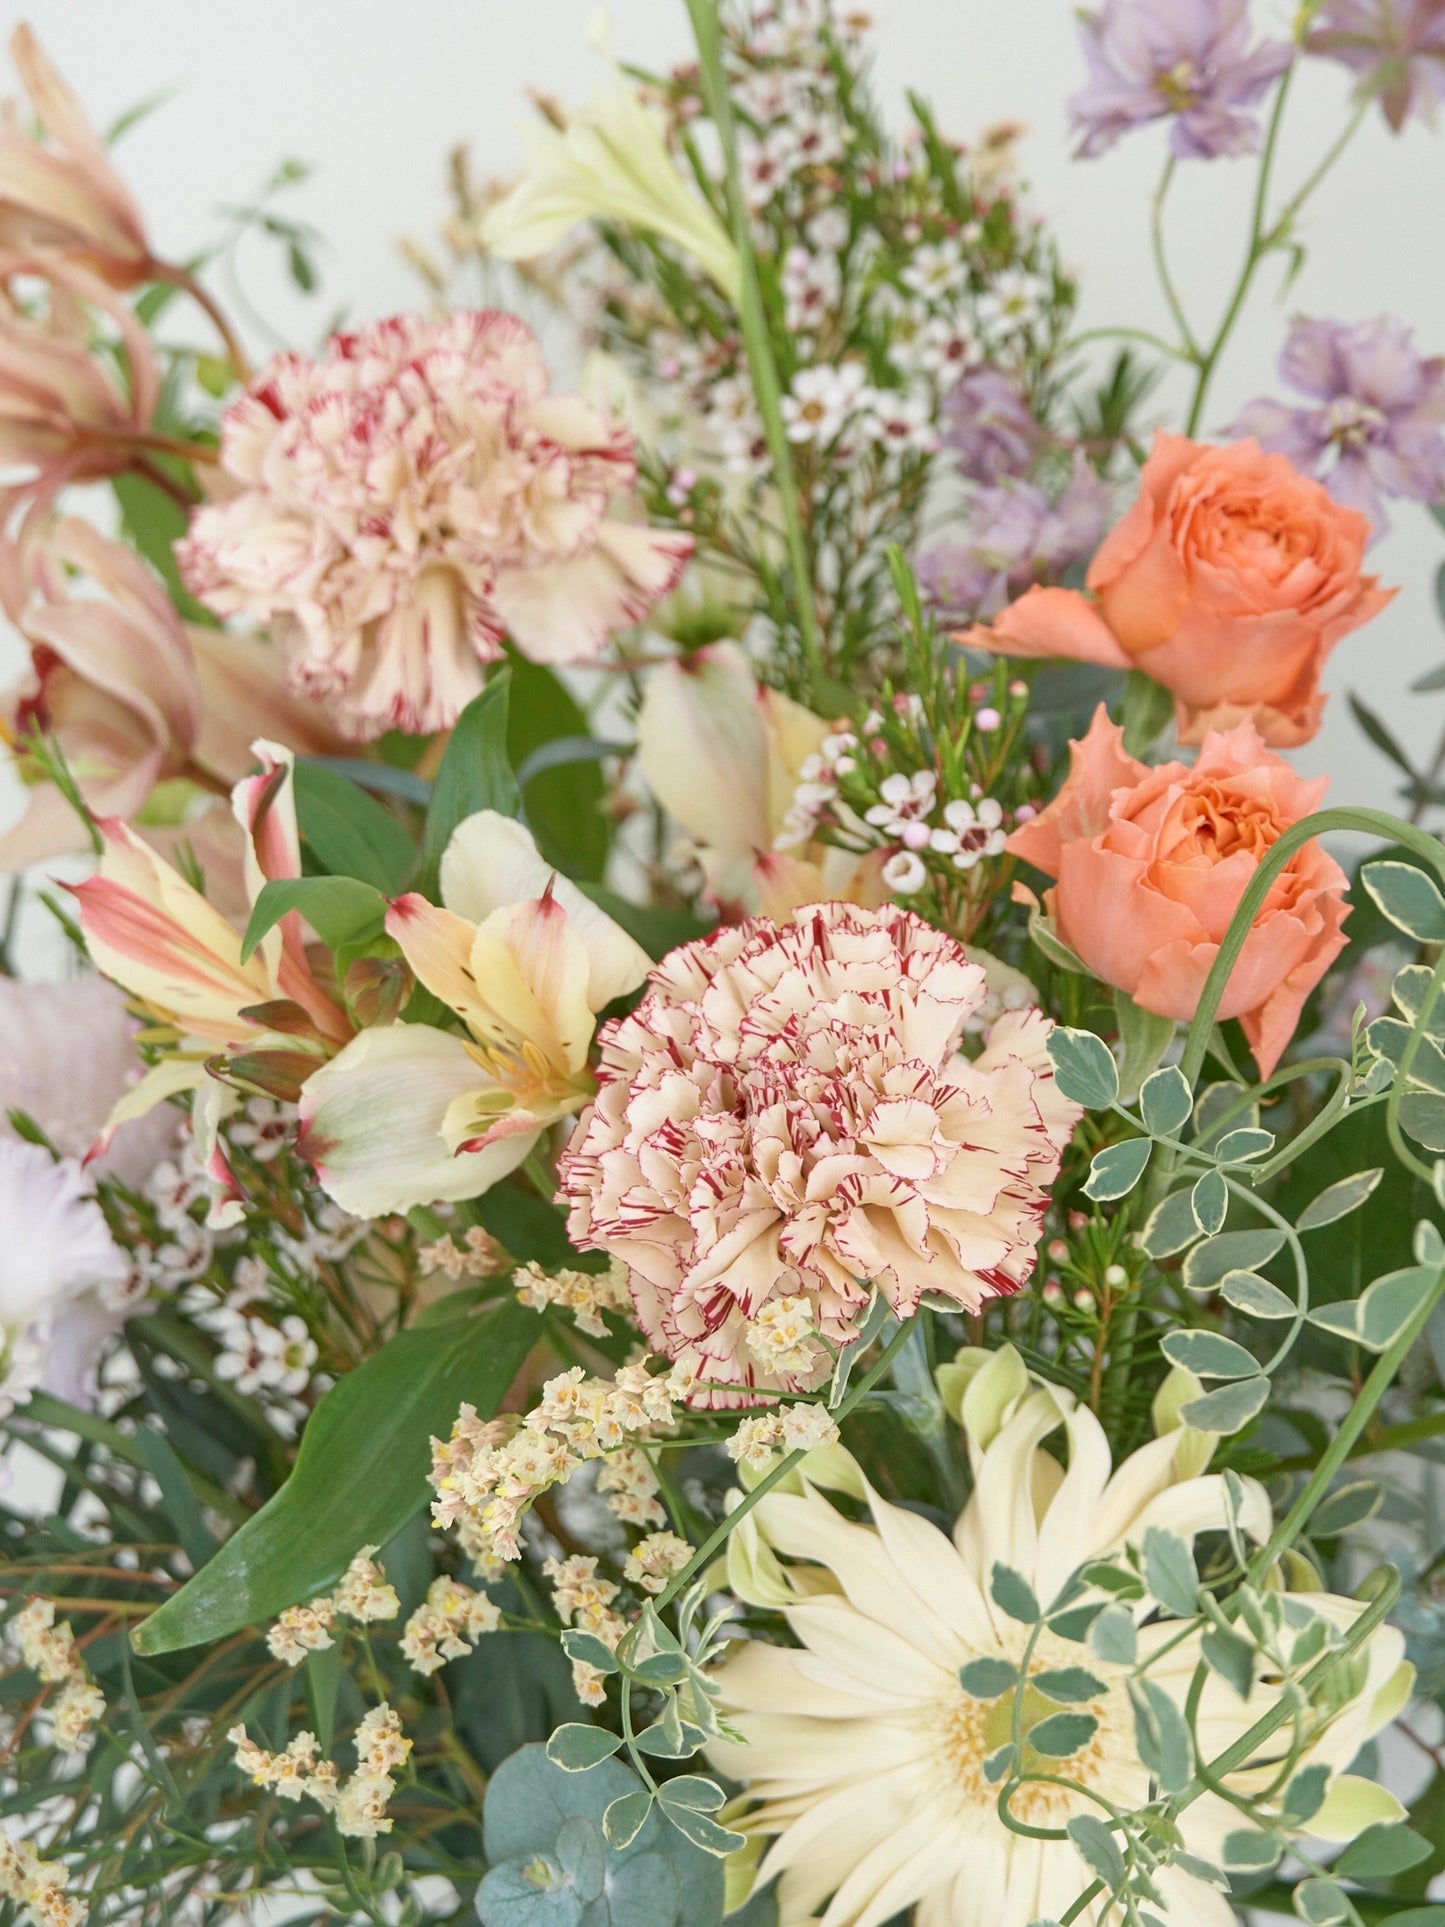 【mother's day】bouquet L【Delivery date: 5/10 (Fri)】